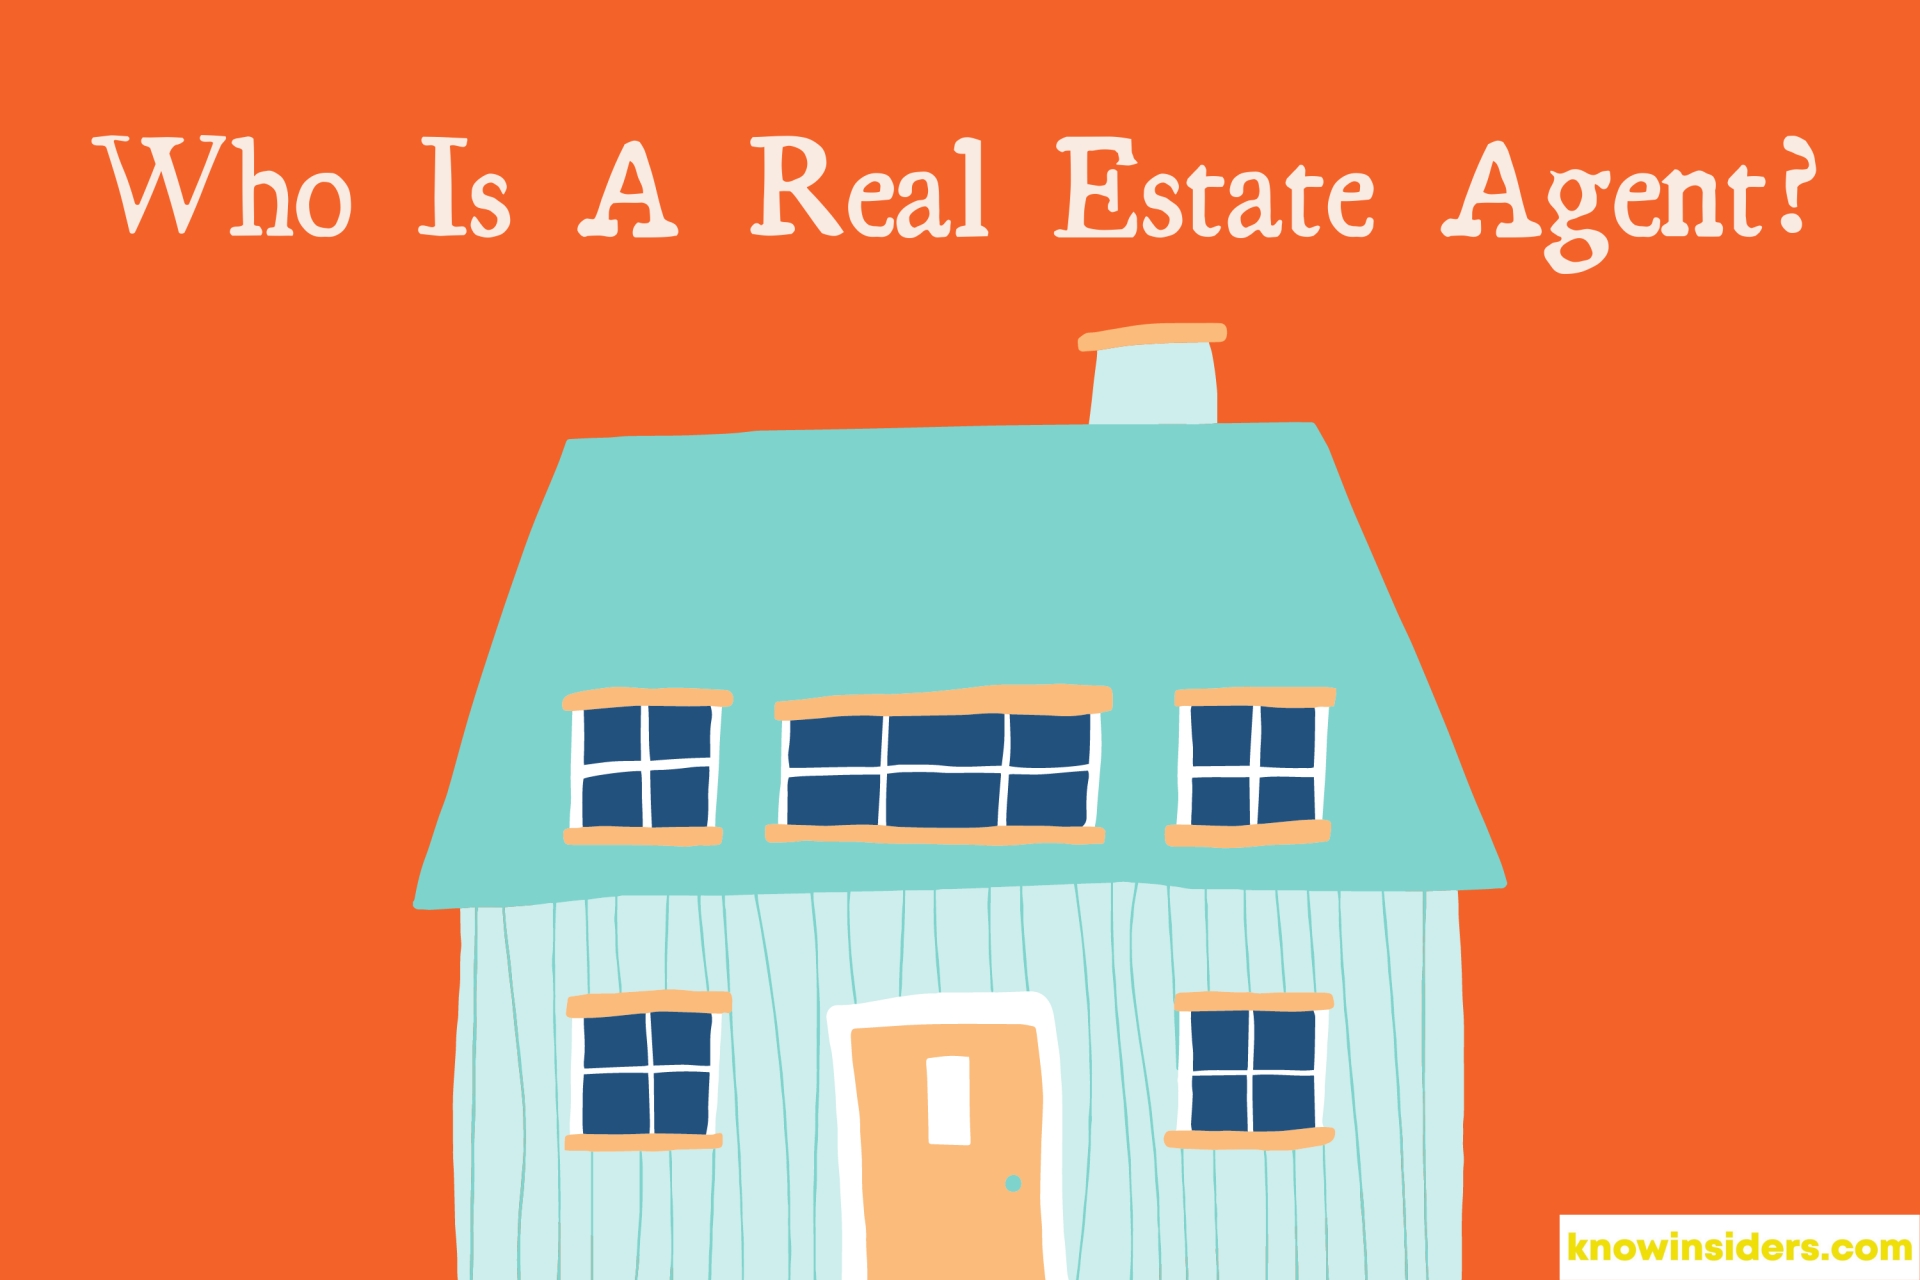 Who Is A Real Estate Agent?